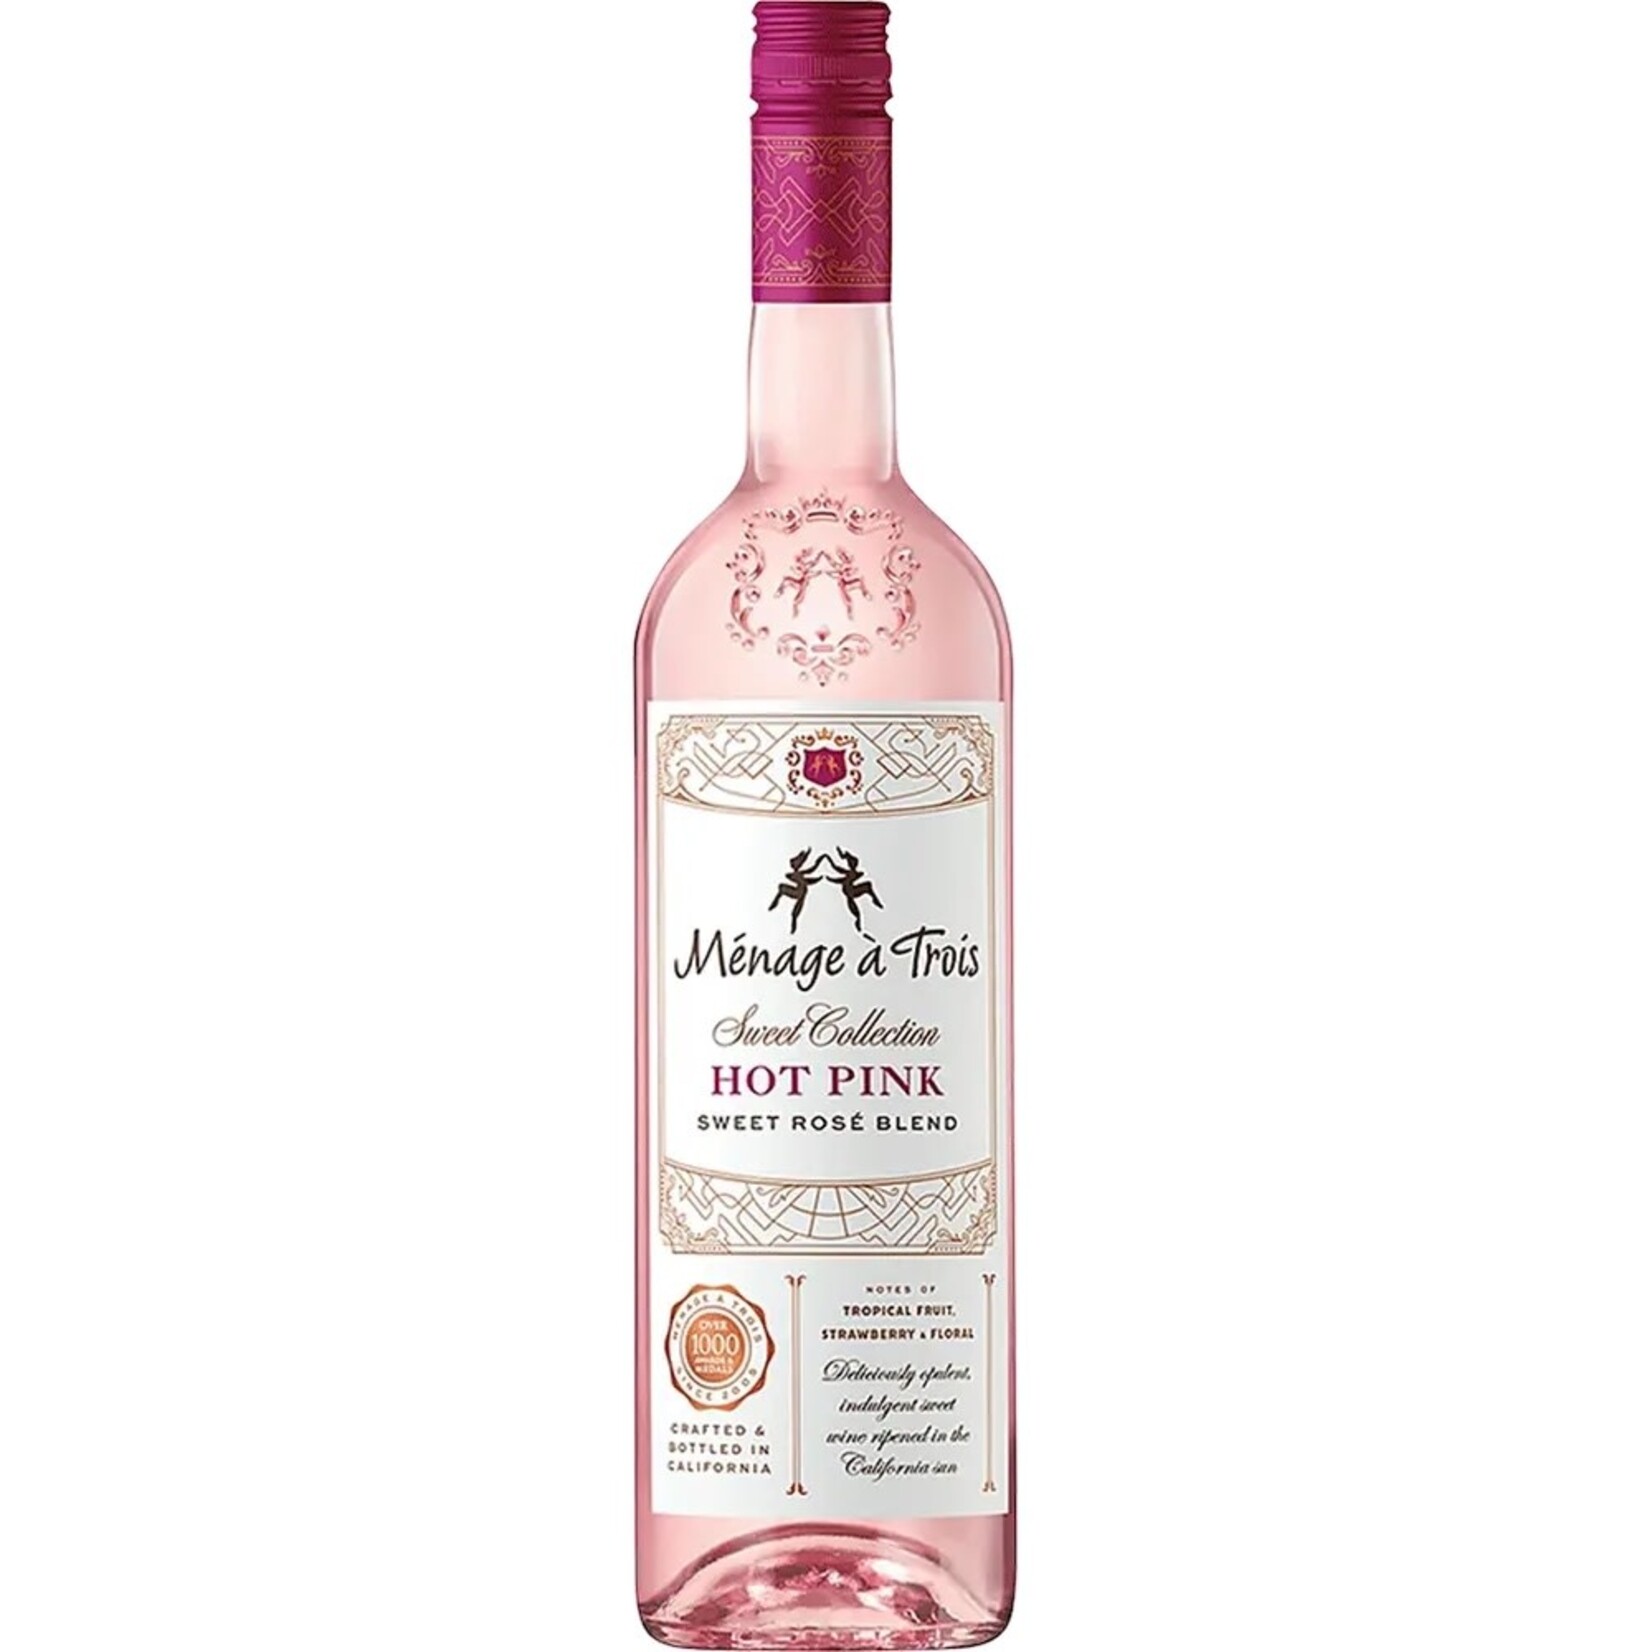 Menage A Trois Menage a Trois Hot Pink Sweet Rose 750 mL